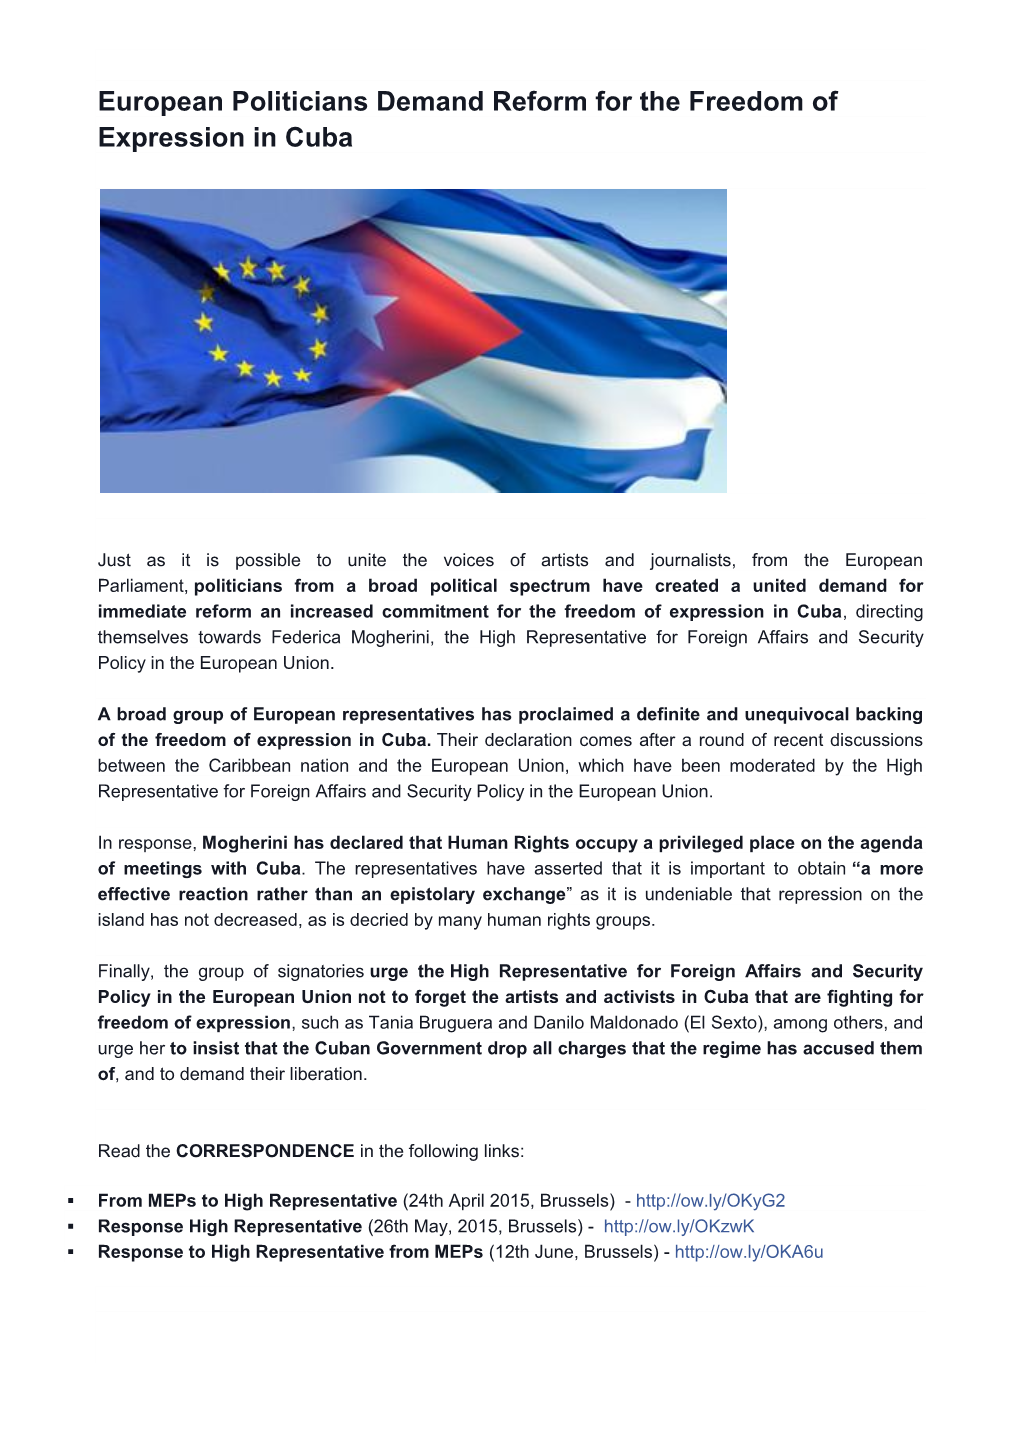 European Politicians Demand Reform for the Freedom of Expression in Cuba